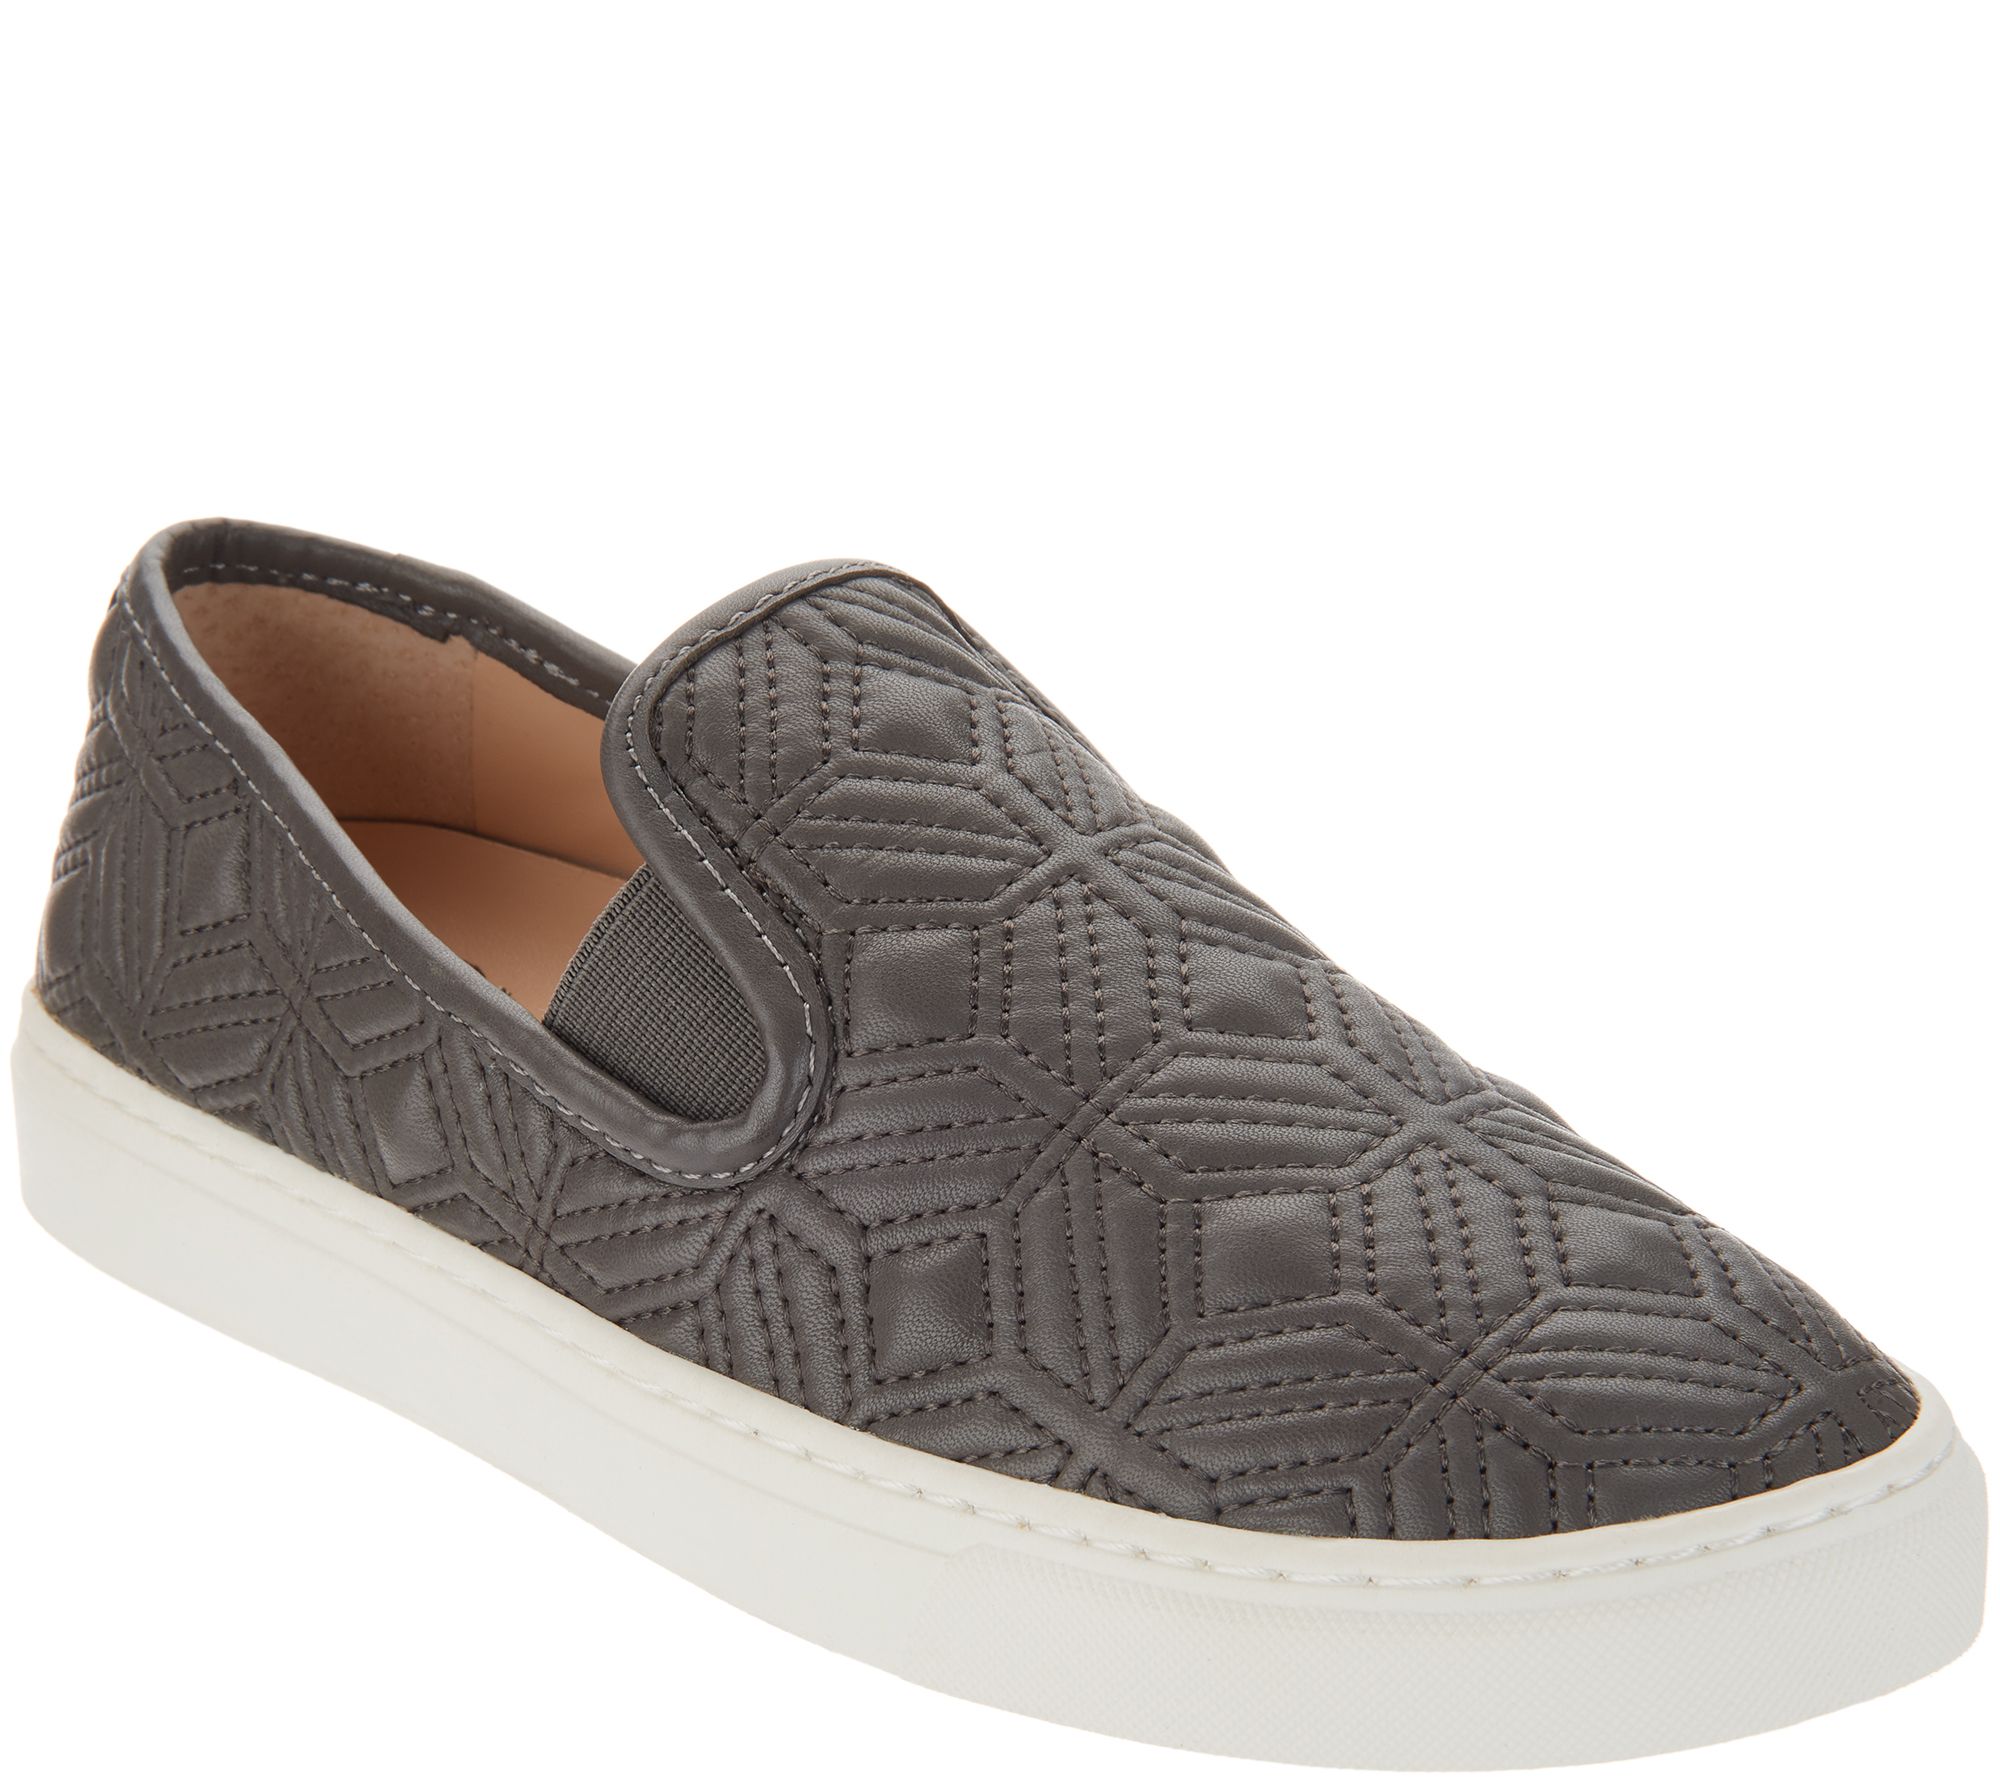 Vince Camuto Slip-On Shoes-Bianna - QVC 